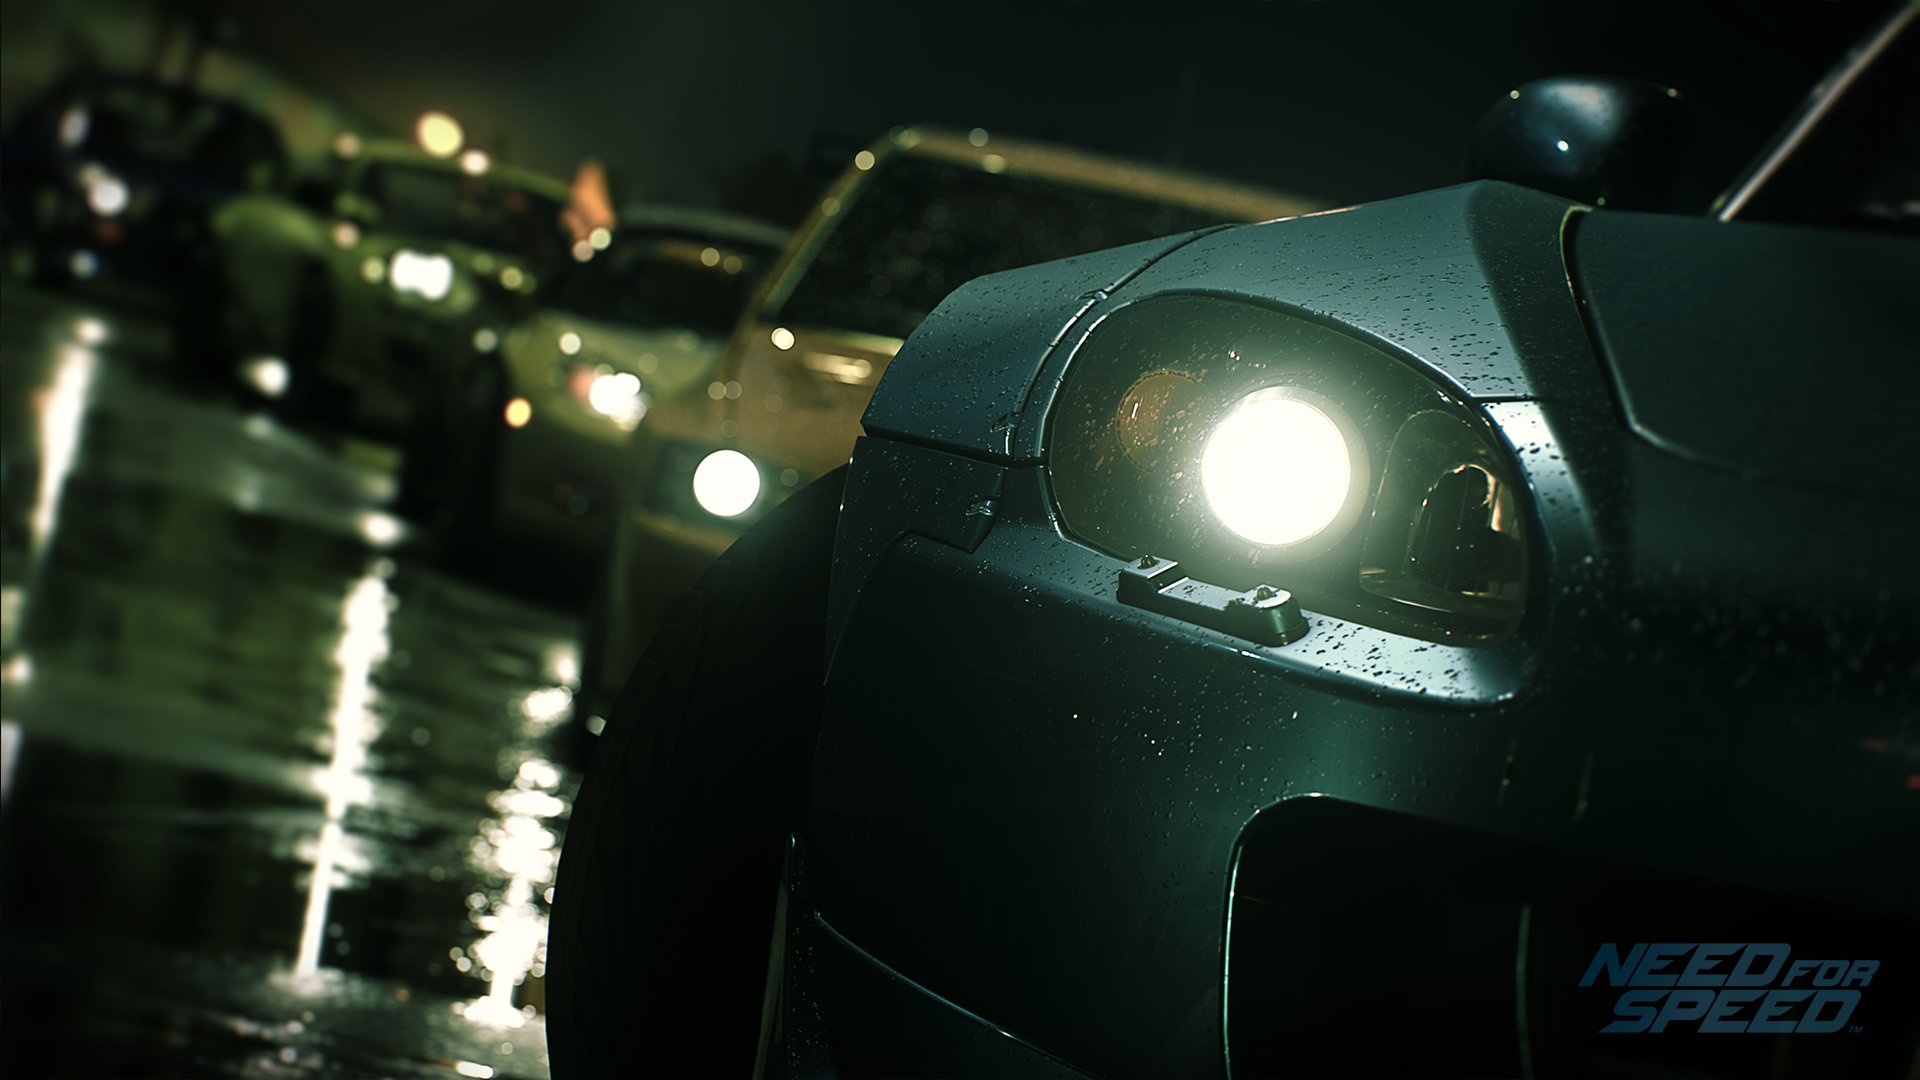 Nfs assemble. Need for Speed 2015. NFS need for Speed 2015. Неед фор Спеед 2015.